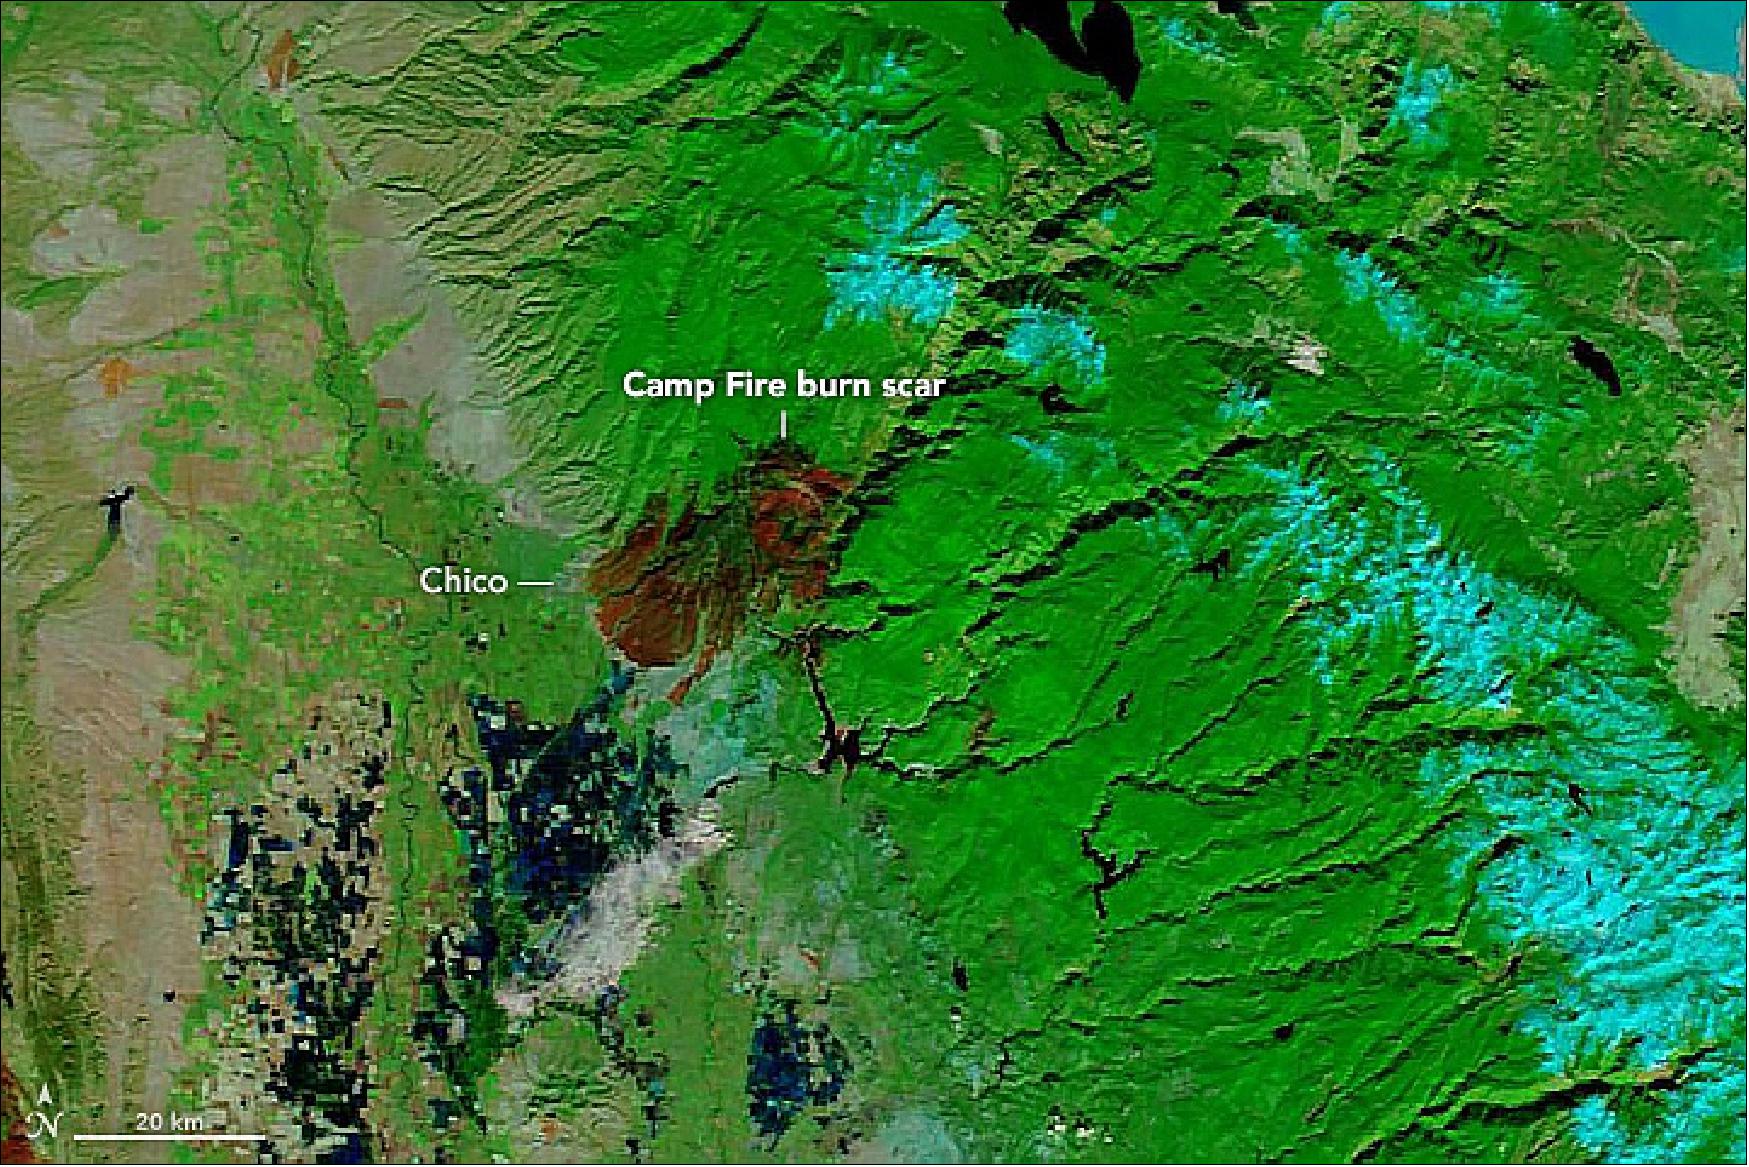 Figure 3: This image shows the charred land—known as a burn scar—from the Camp Fire, which has destroyed more than 18,000 structures and caused at least 85 deaths. The fire, which has burned more than 153,000 acres, is now fully contained, according to the California Department of Forestry and Fire Protection. This image was acquired by MODIS on NASA’s Terra satellite on 25 November 2018 (image credit: NASA Earth Observatory, image by Lauren Dauphin, using MODIS data from NASA EOSDIS/LANCE and GIBS/Worldview. Story by Kasha Patel)